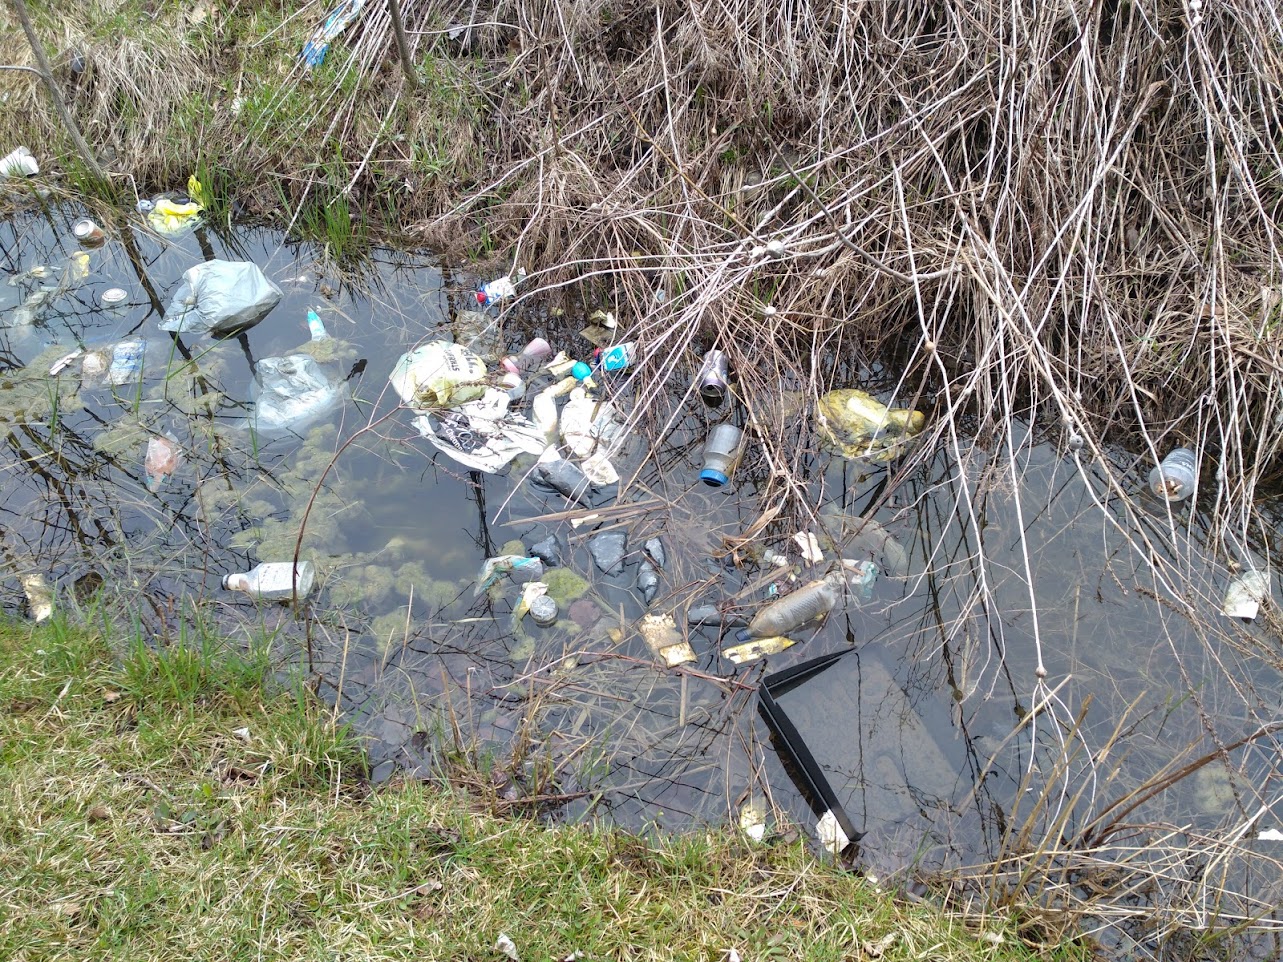 Picture of litter including plastic bags and take out cups floating in water stream